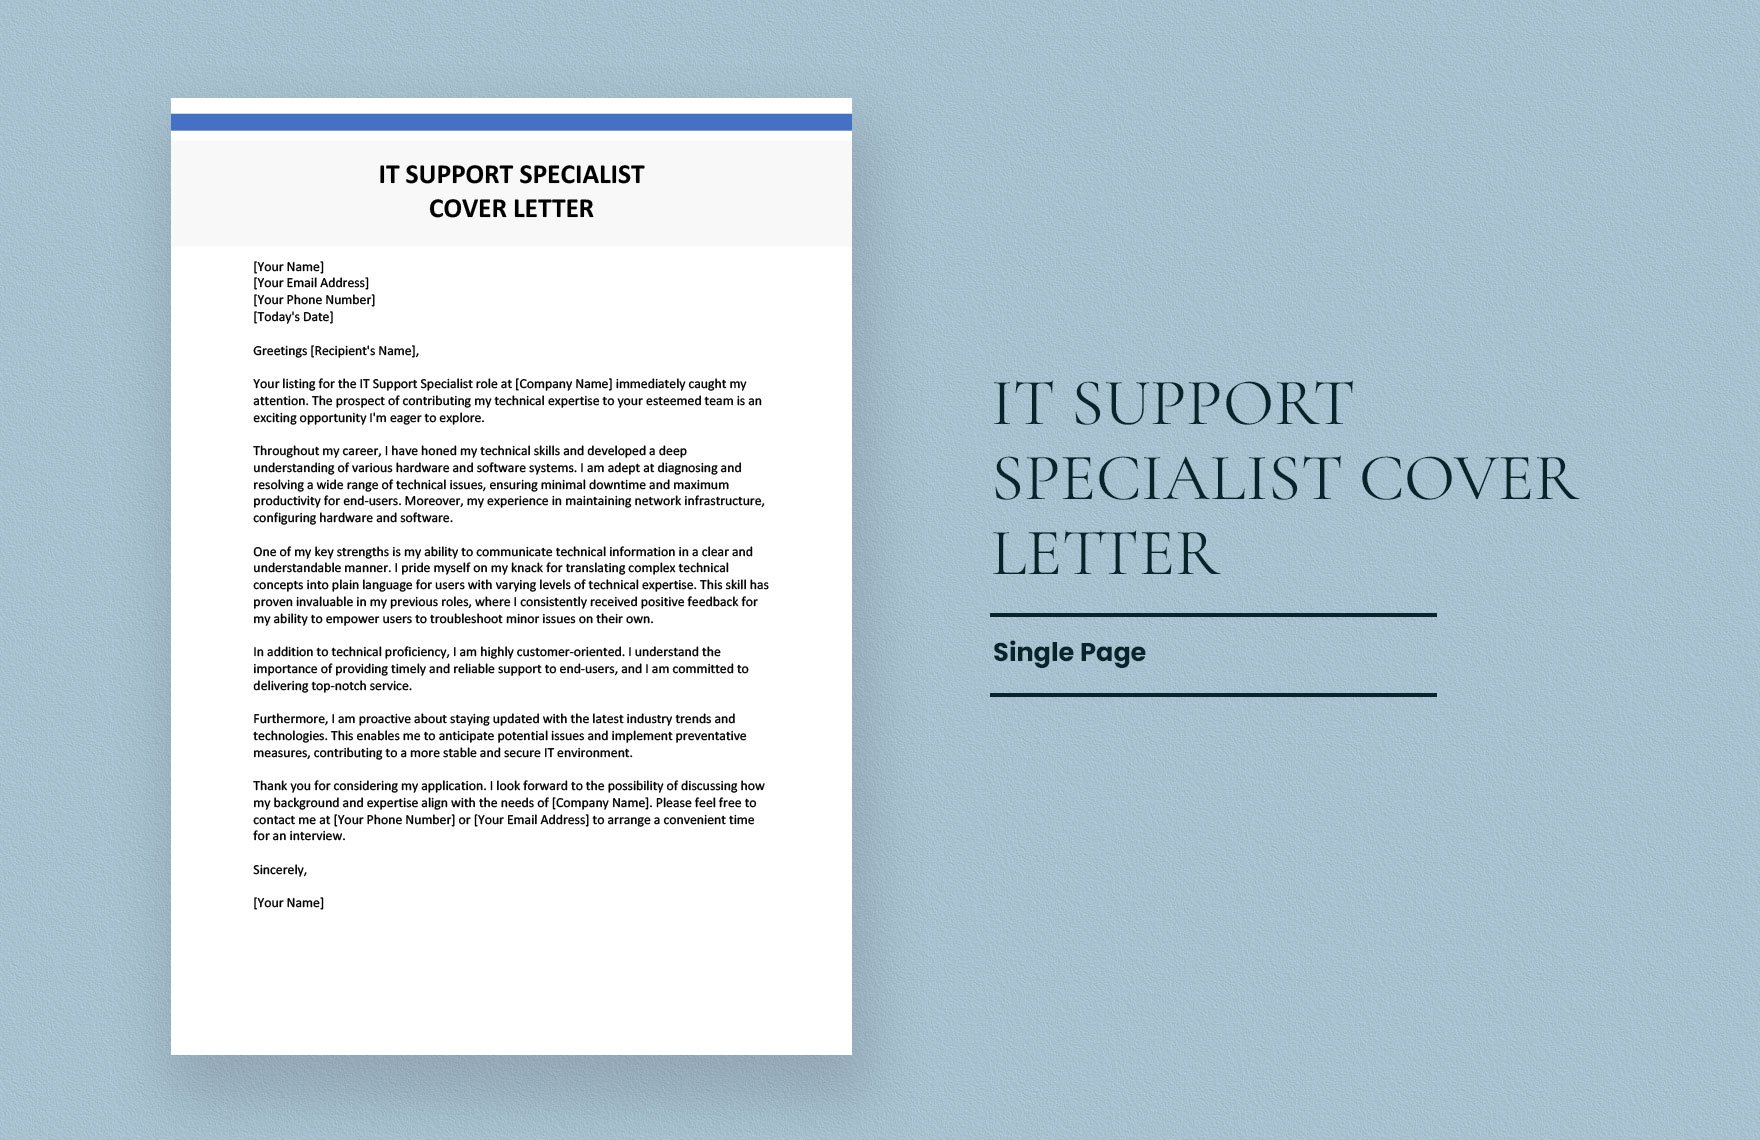 IT Support Specialist Cover Letter